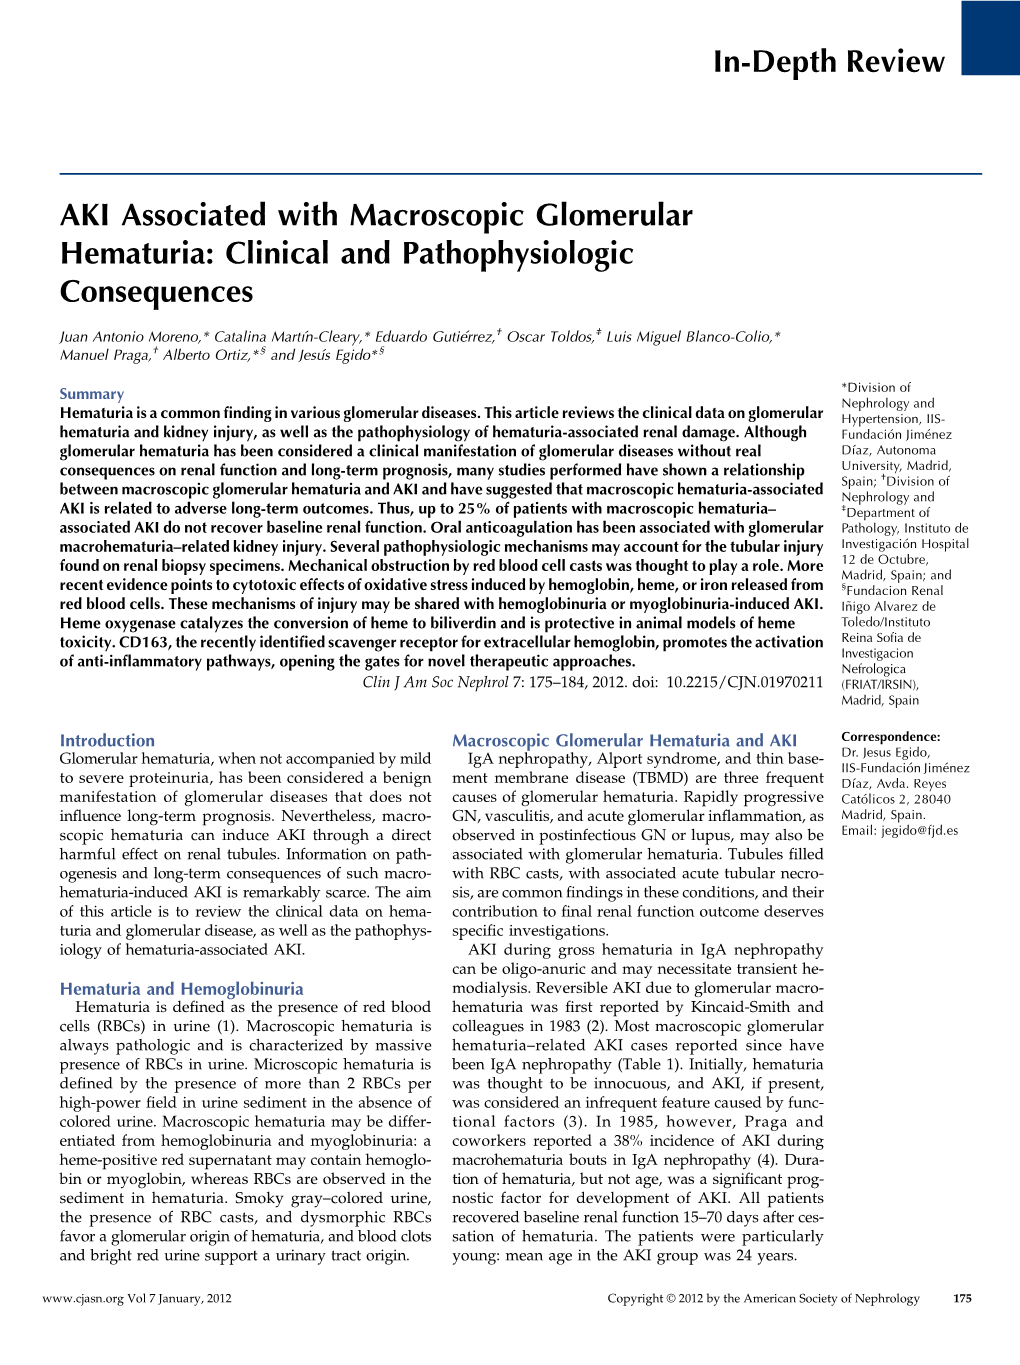 In-Depth Review AKI Associated with Macroscopic Glomerular Hematuria: Clinical and Pathophysiologic Consequences